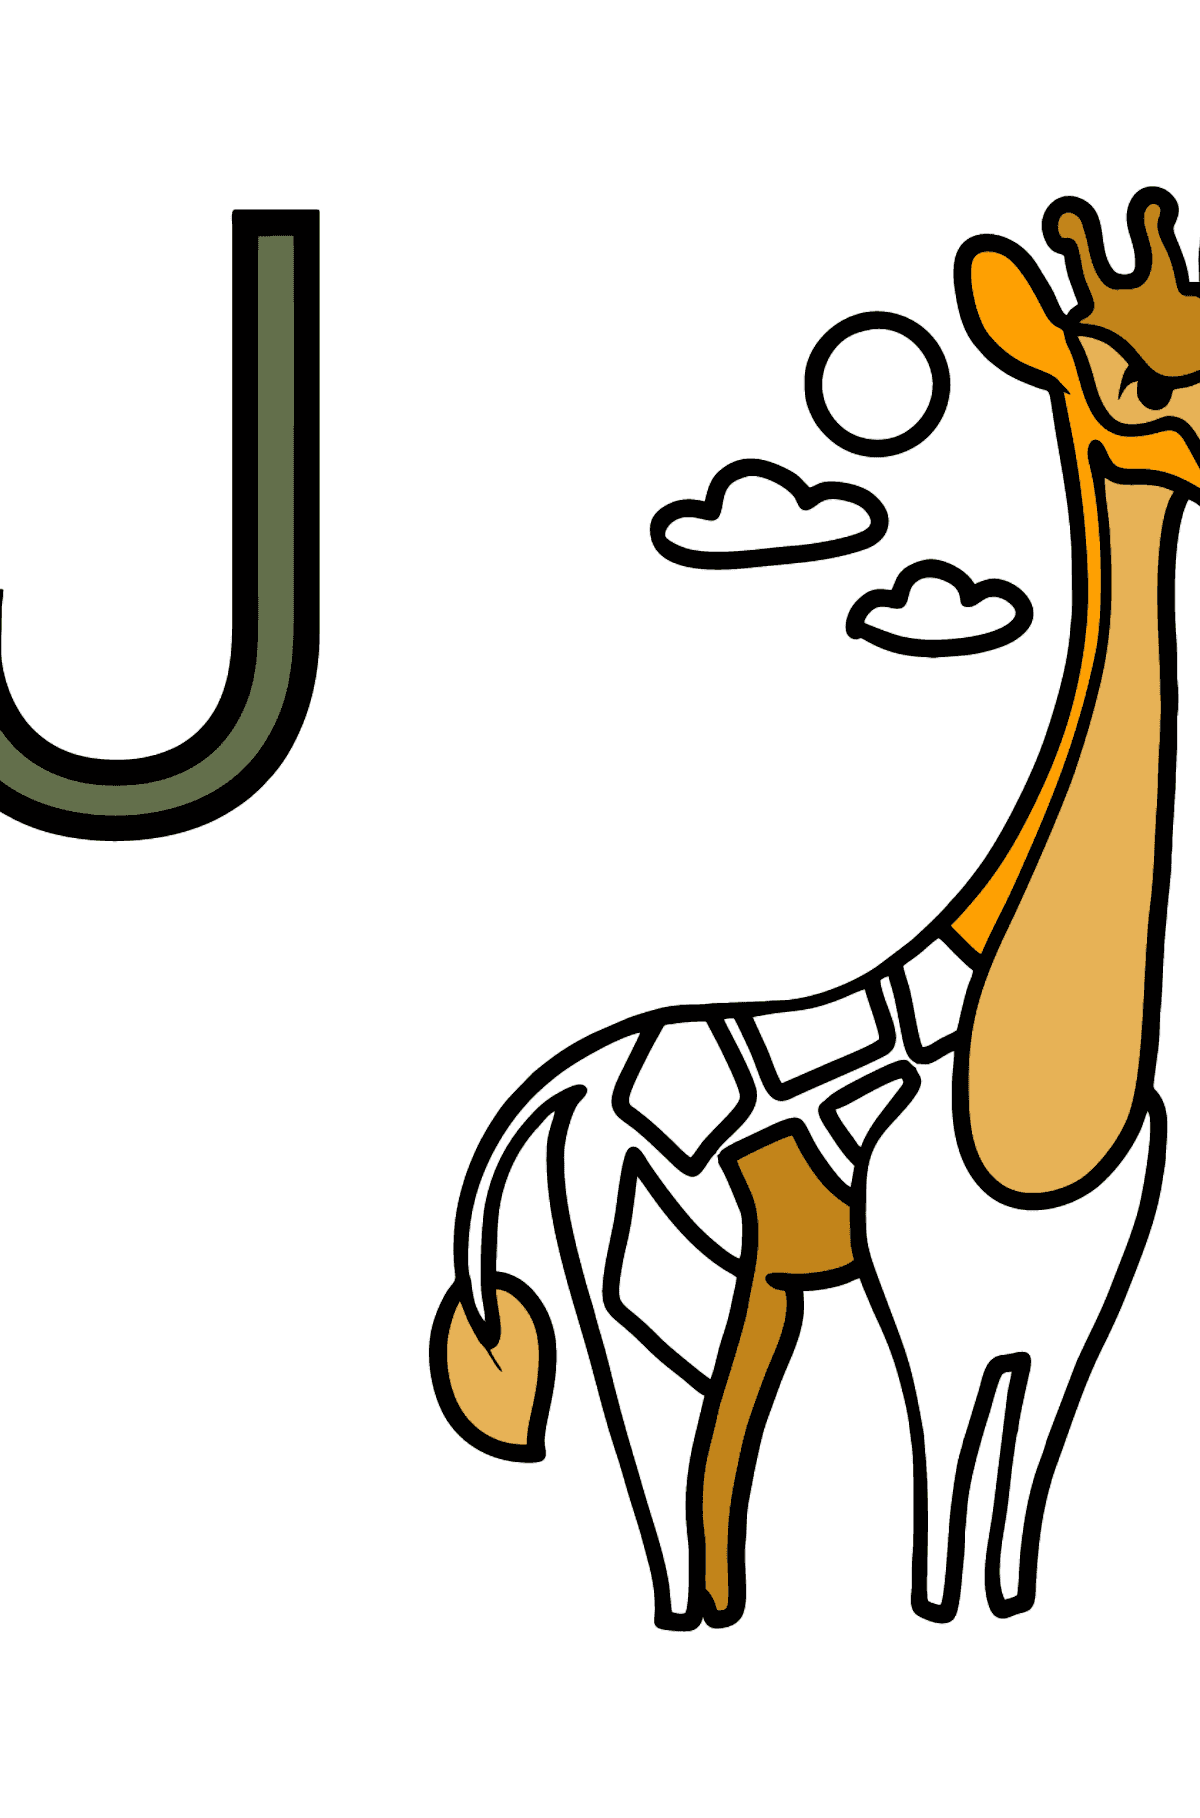 Spanish Letter J coloring pages - JIRAFA - Coloring Pages for Kids